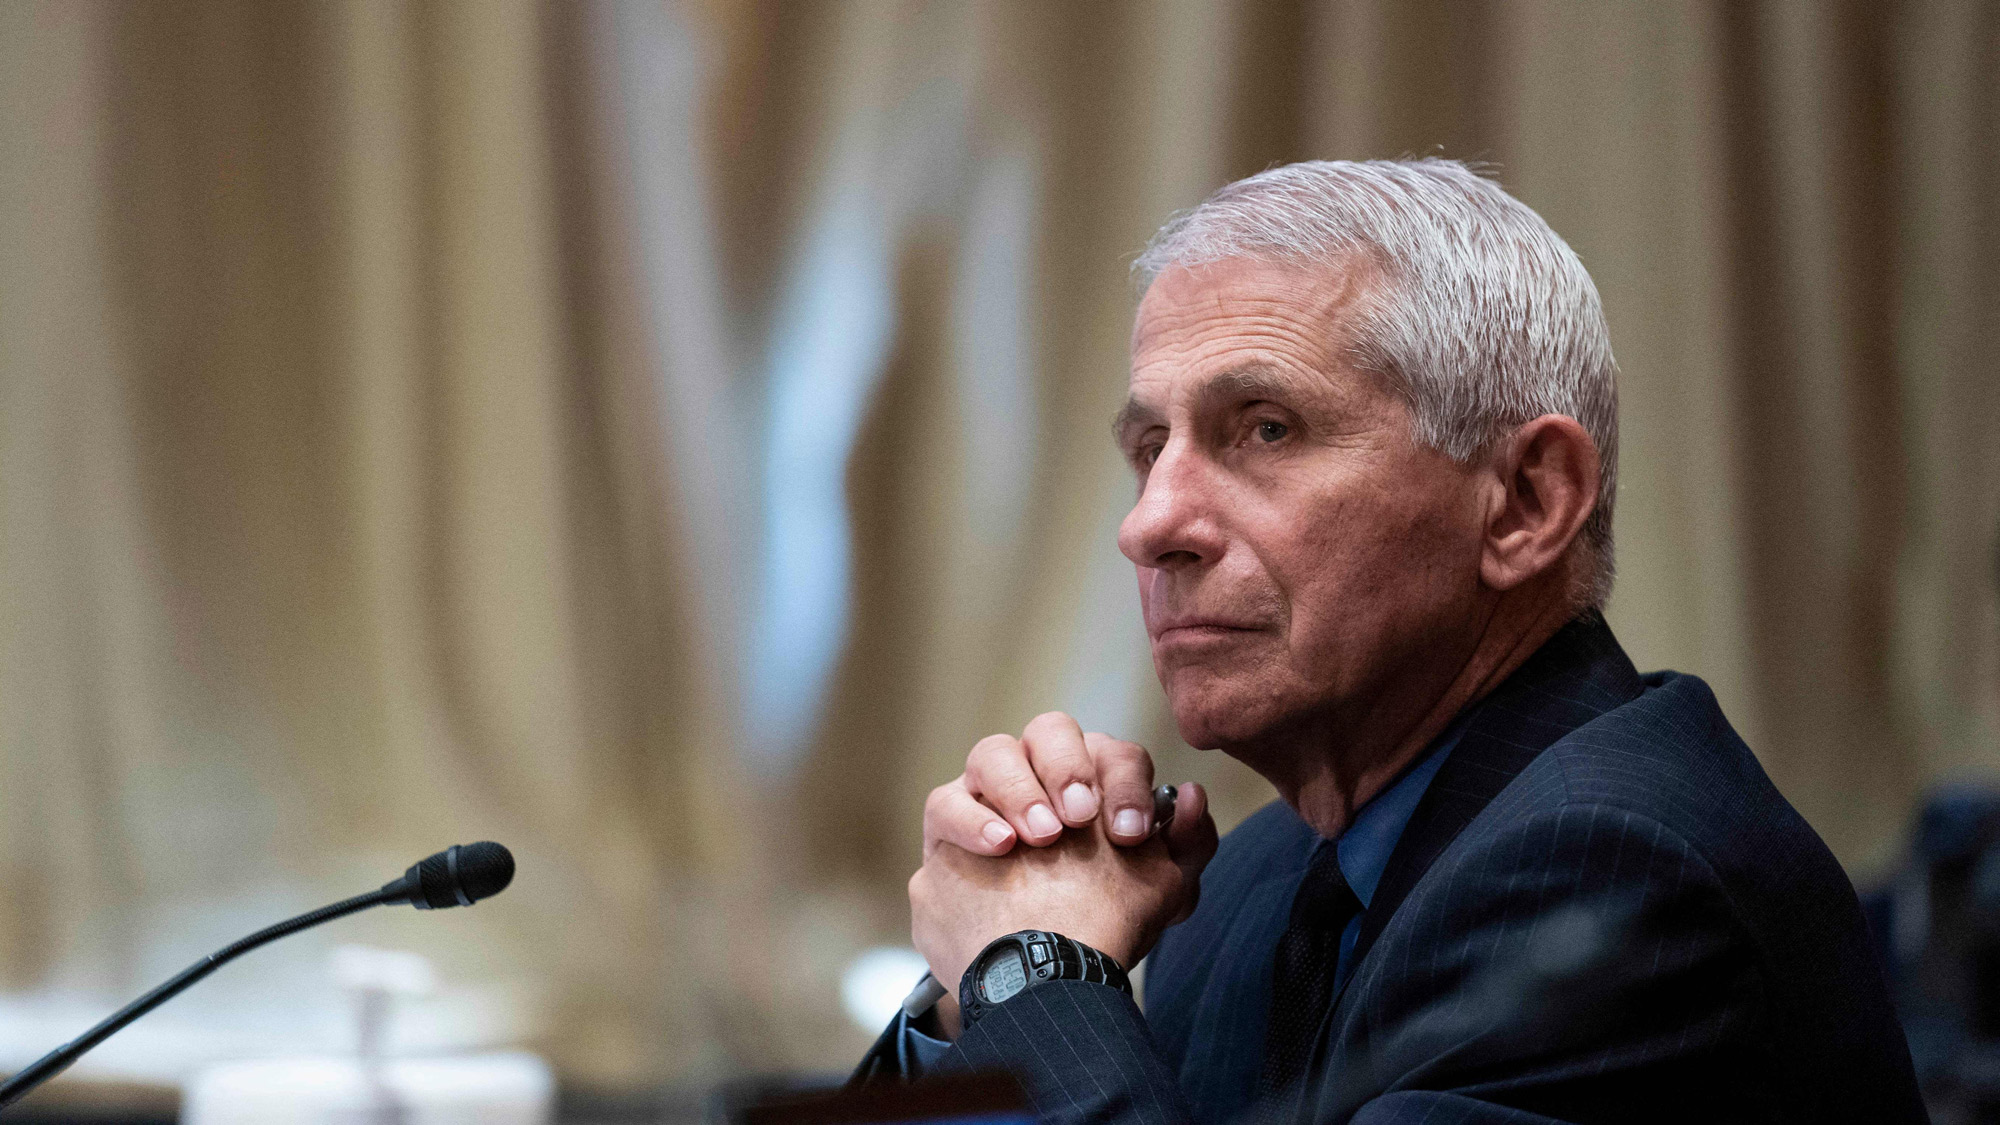 Dr. Anthony Fauci, director of the National Institute of Allergy and Infectious Diseases, listens during a hearing on Capitol Hill in Washington, DC, on May 26.